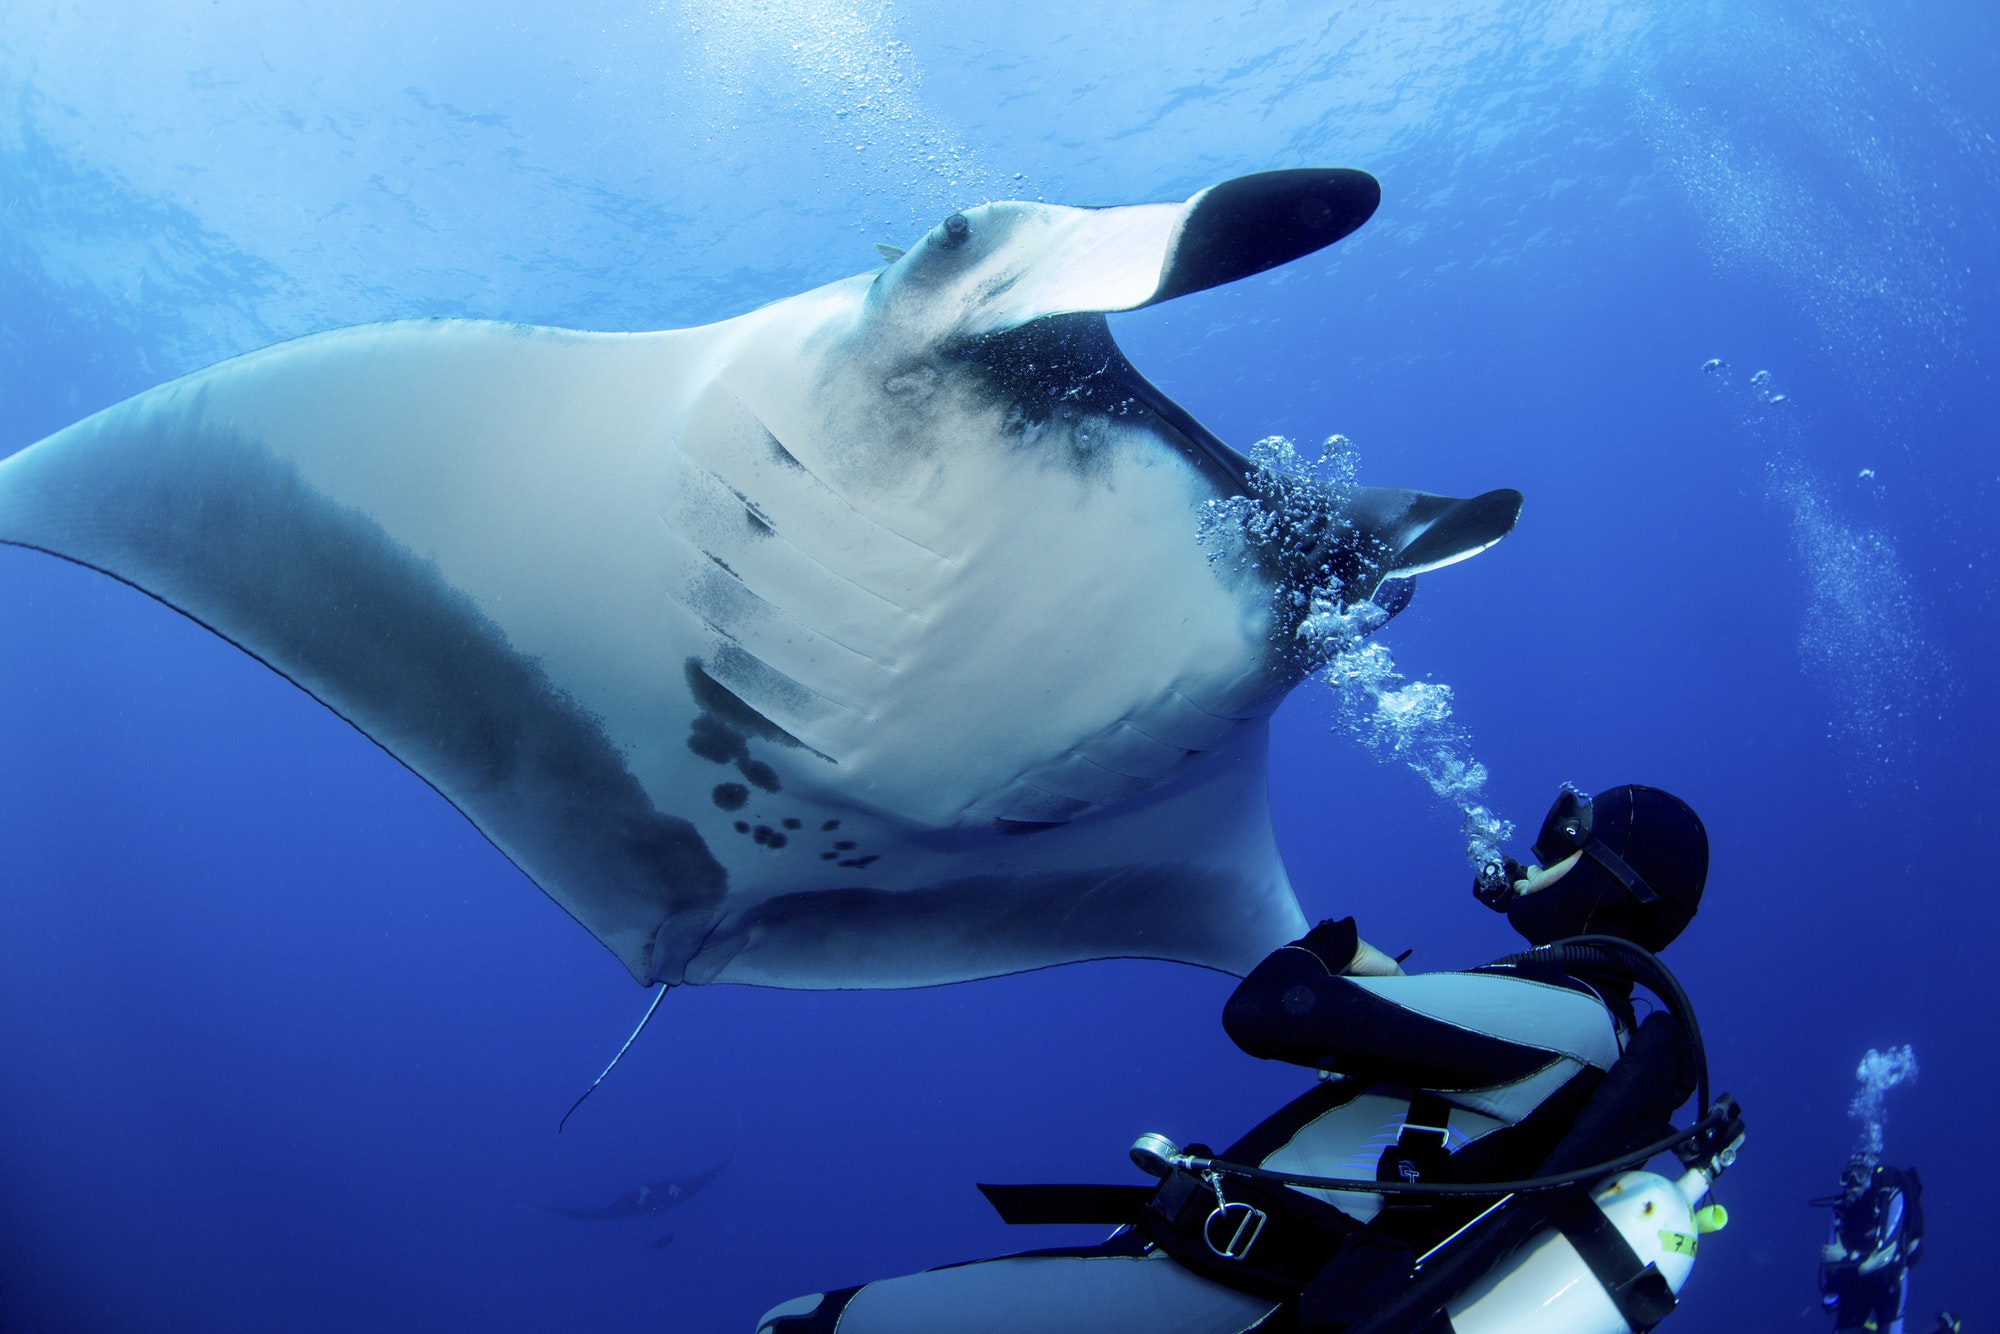 A diver approaching a Giant oceanic manta ray underwater